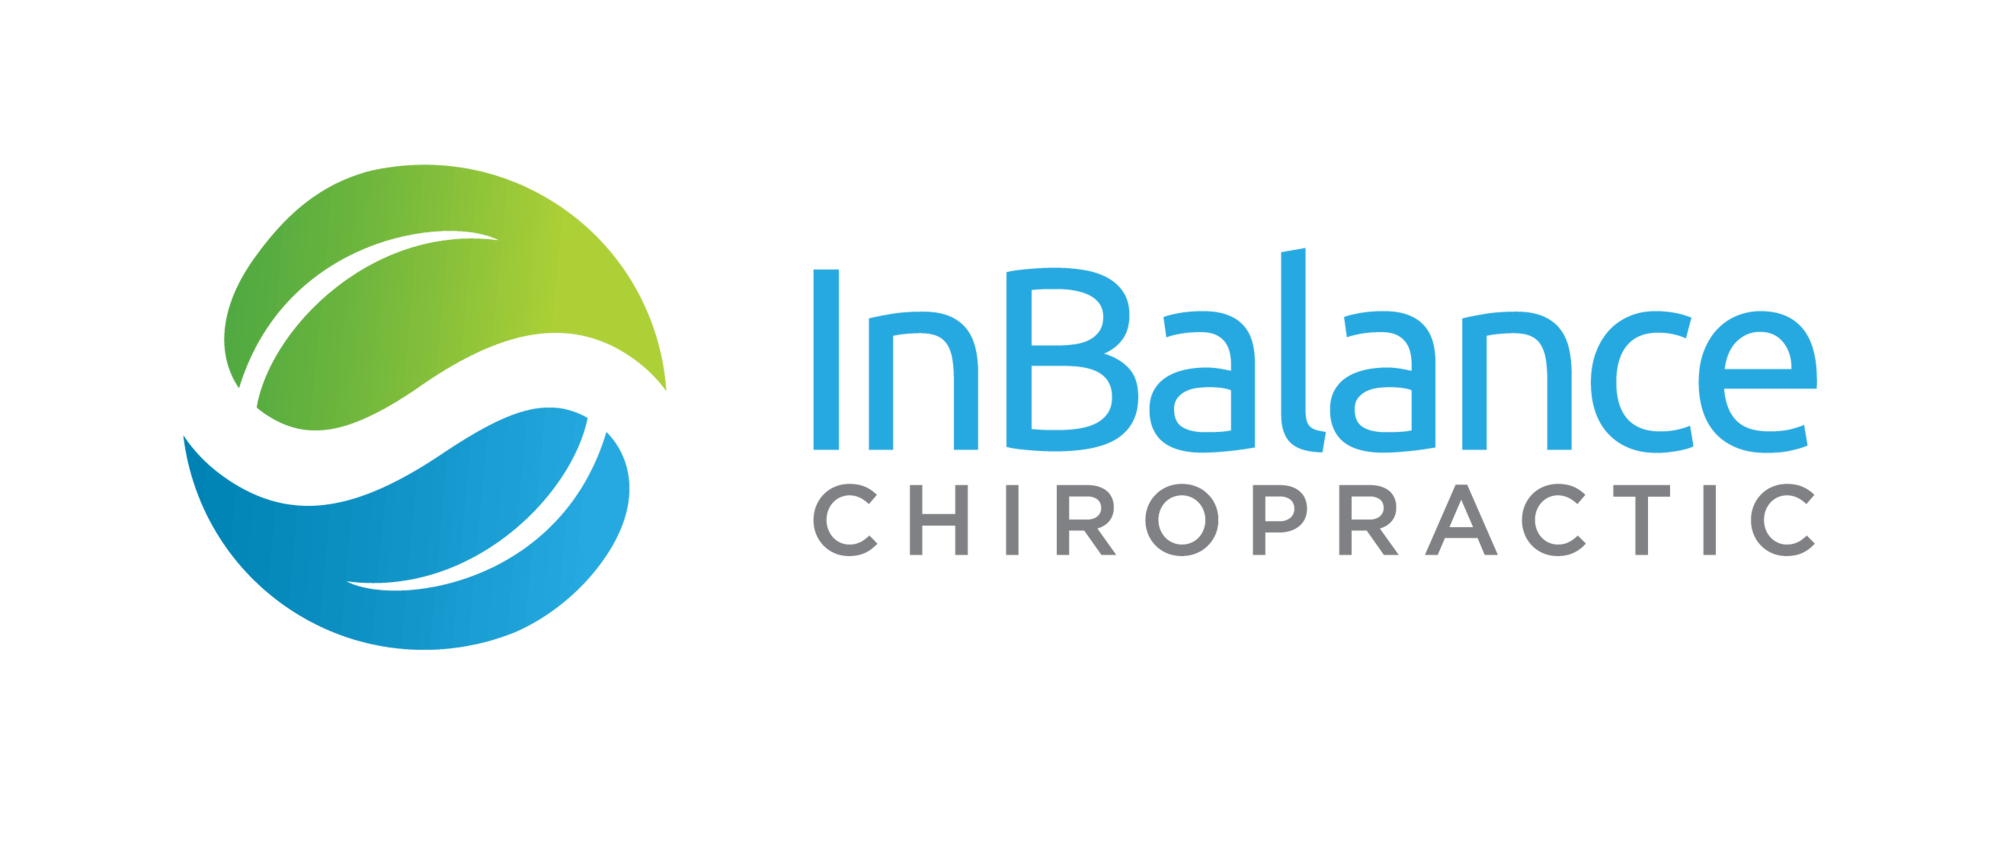 InBalance Chiropractic business logo with an abstract yin-yang